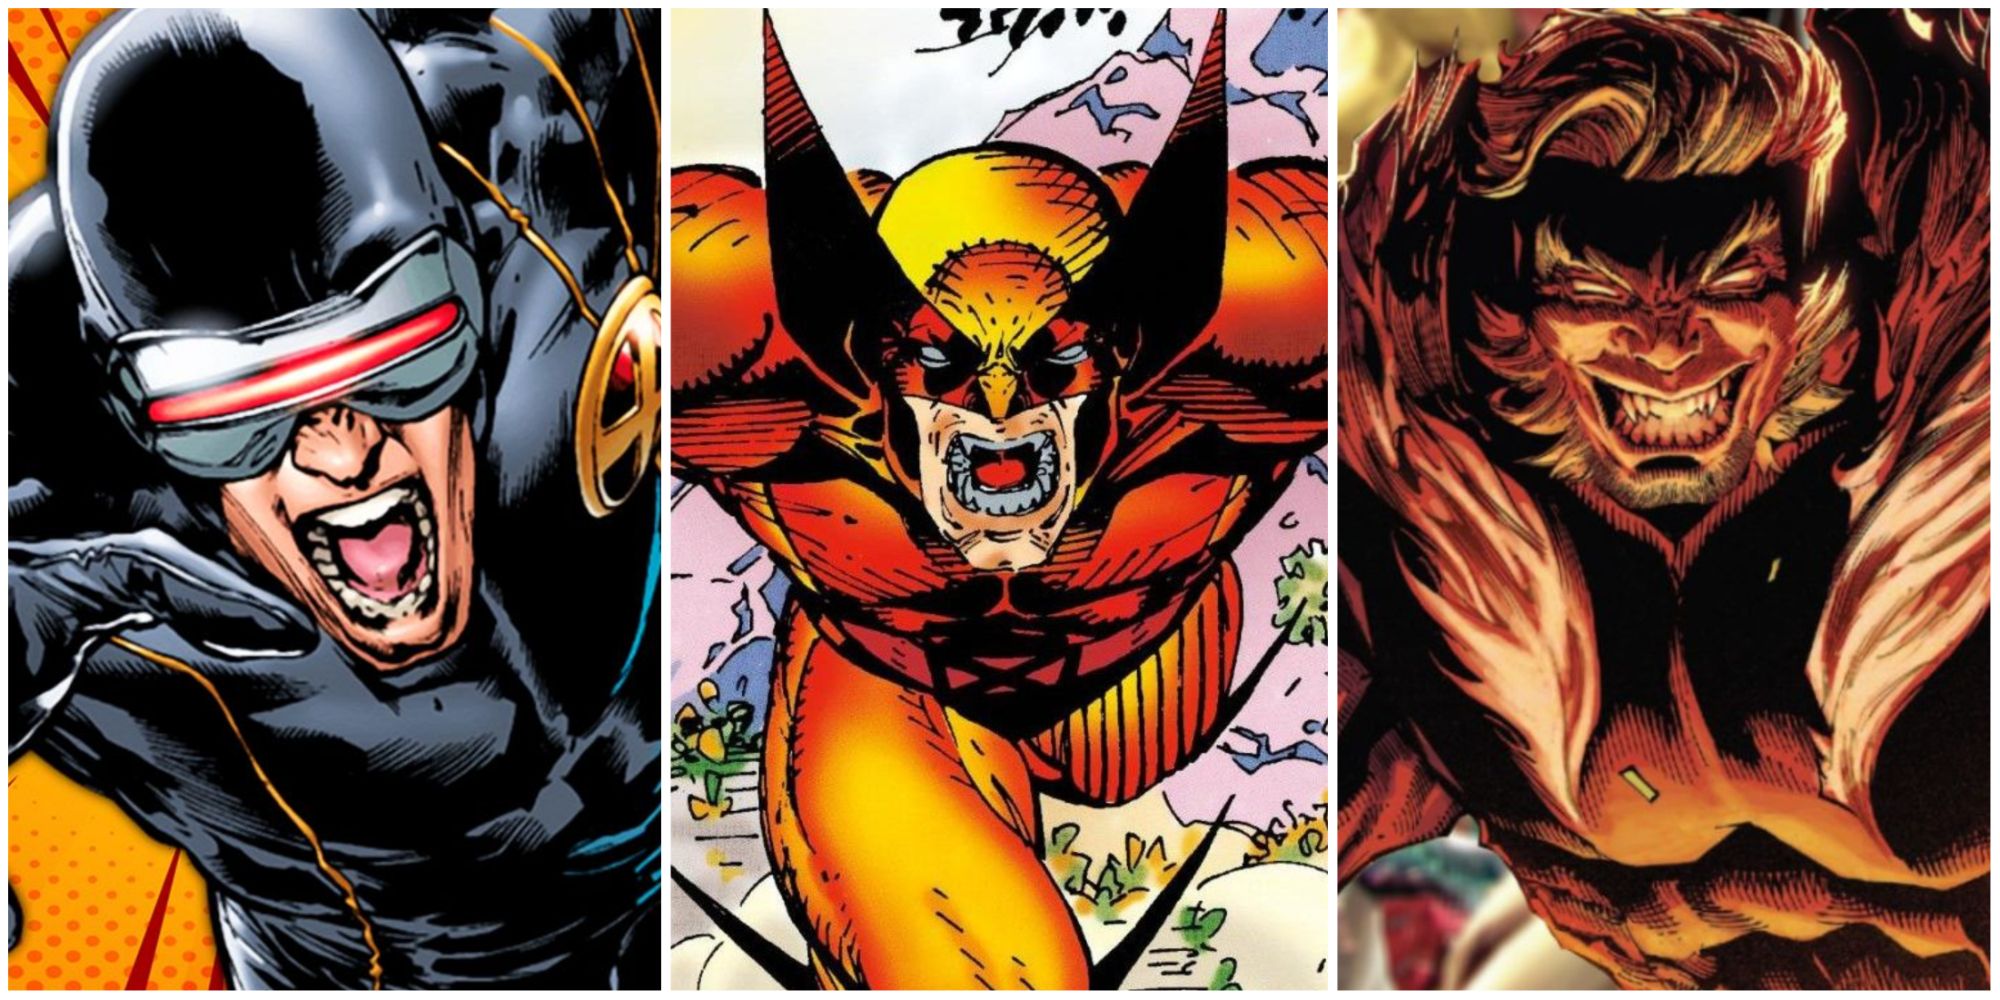 A split image of Cyclops, Wolverine, and Sabretooth yelling with rage in Marvel Comics